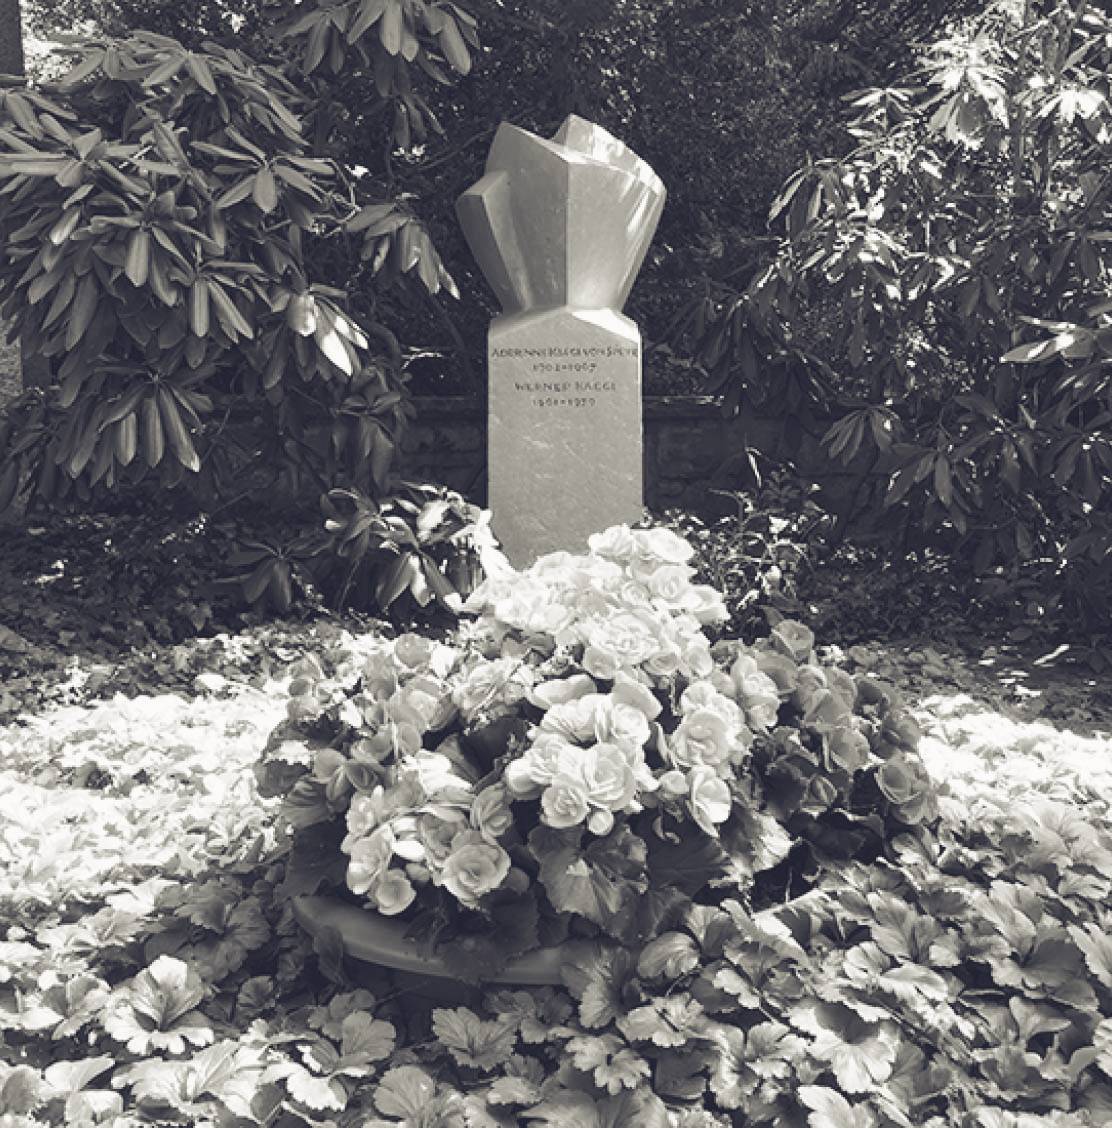 Adrienne’s tomb in Basle. The sculpture (the inspiration behind our site logo) is an evocation of the Trinity by Albert Schilling